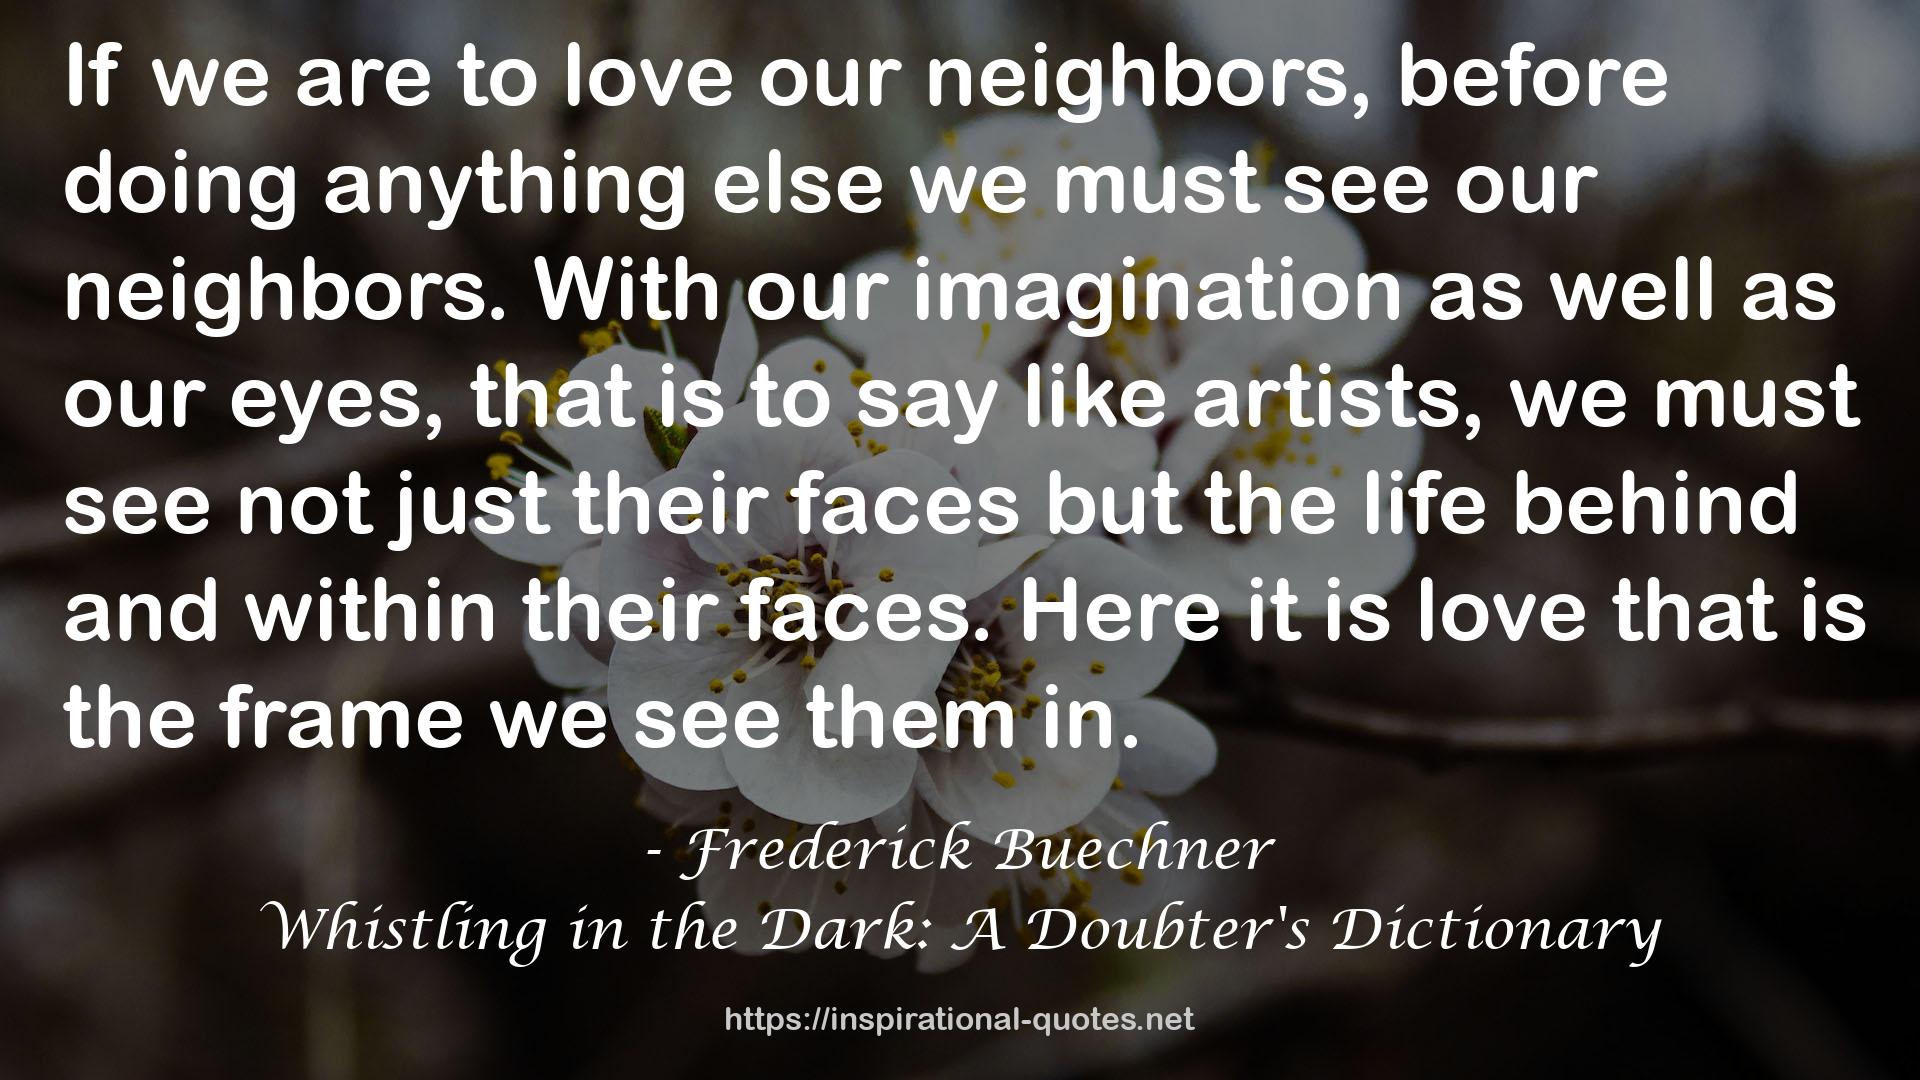 Whistling in the Dark: A Doubter's Dictionary QUOTES